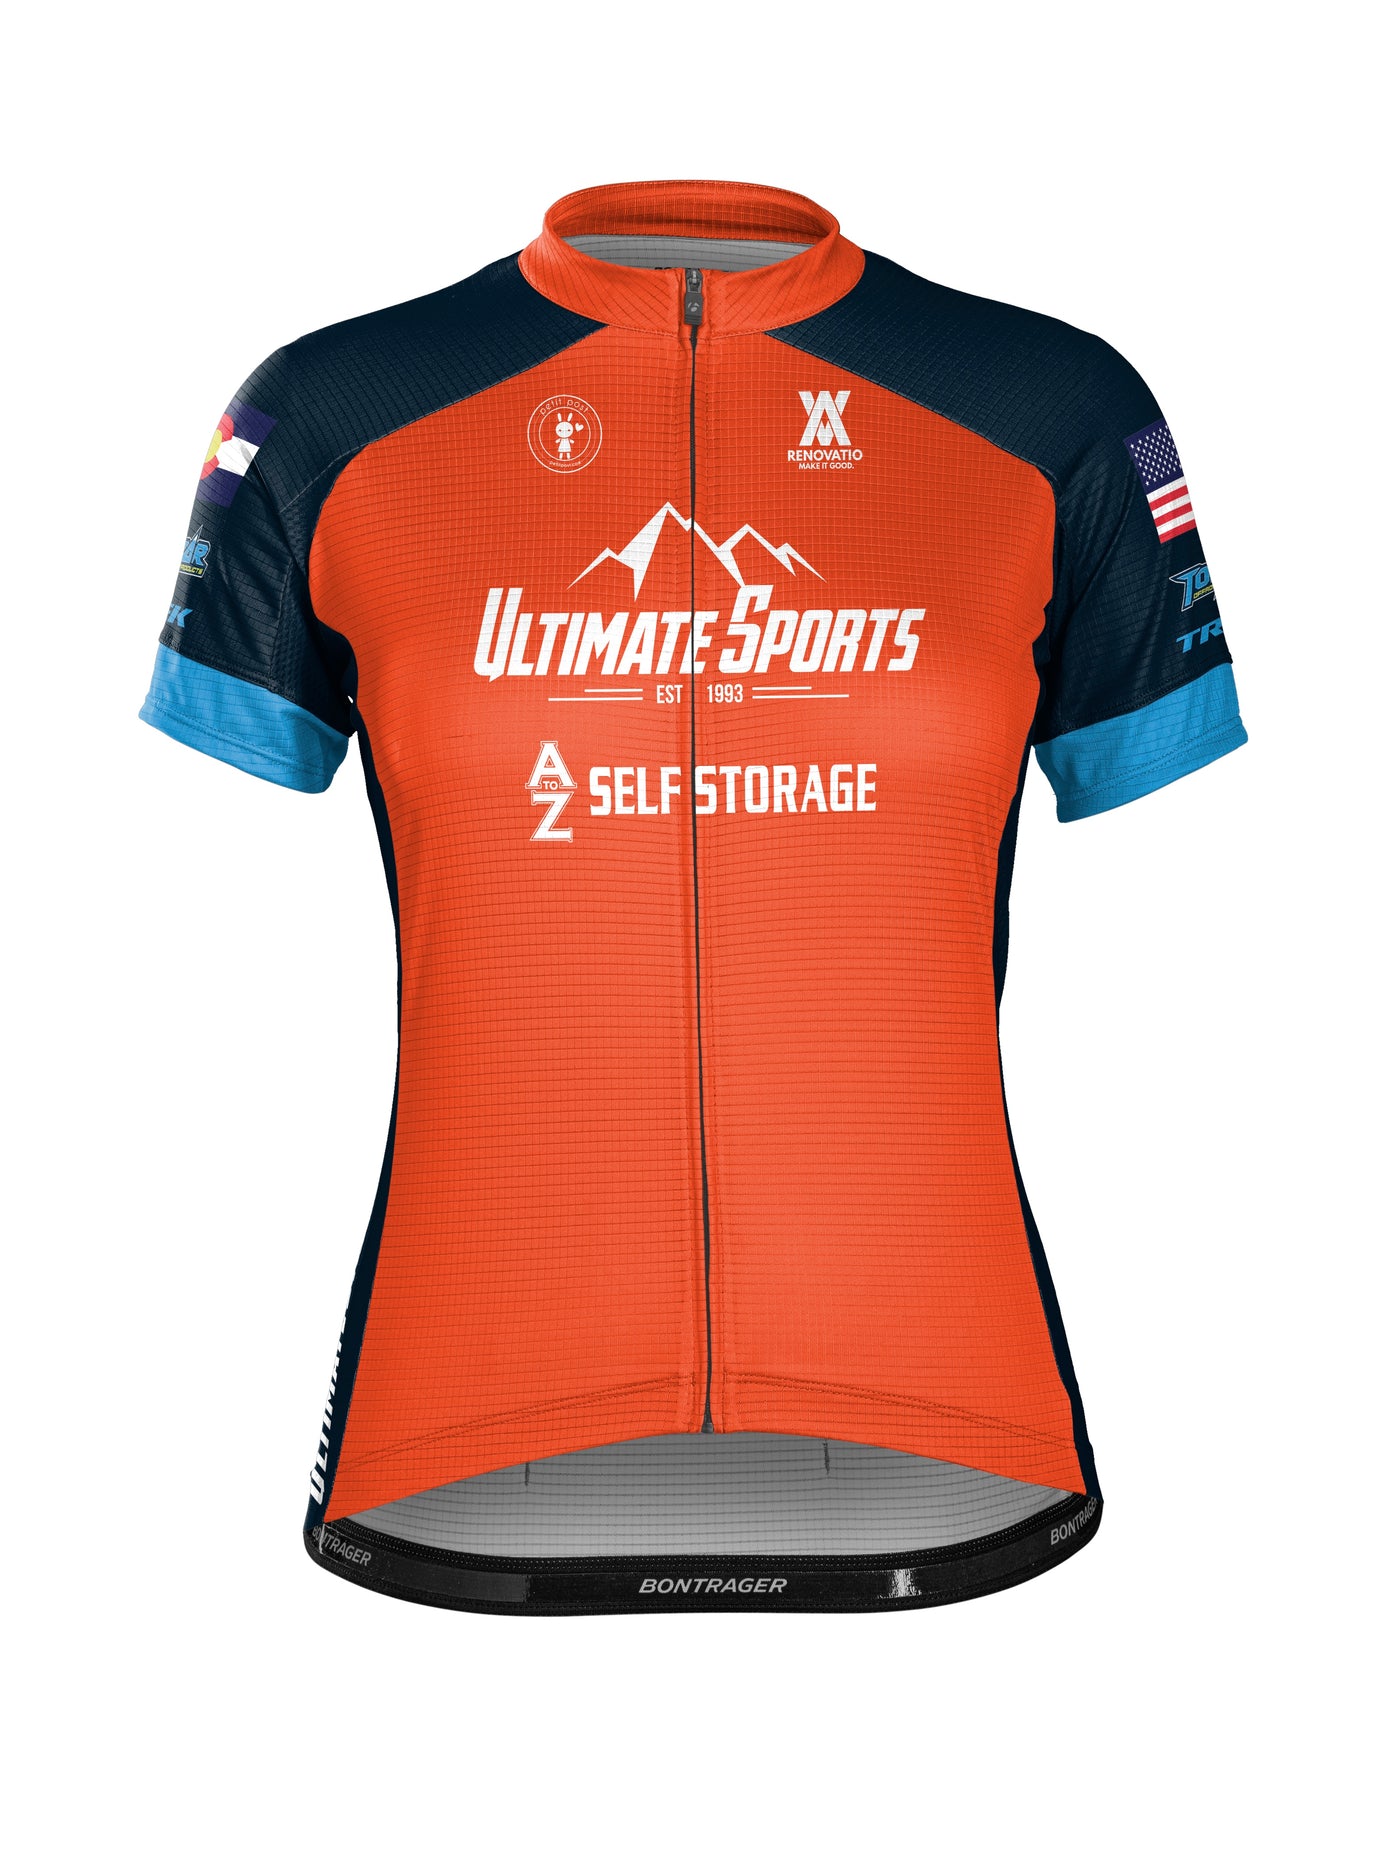 Ultimate Sports Women's Team Cycling Jersey Orange/Blue Full-Zip, Fitted, Short-Sleeve